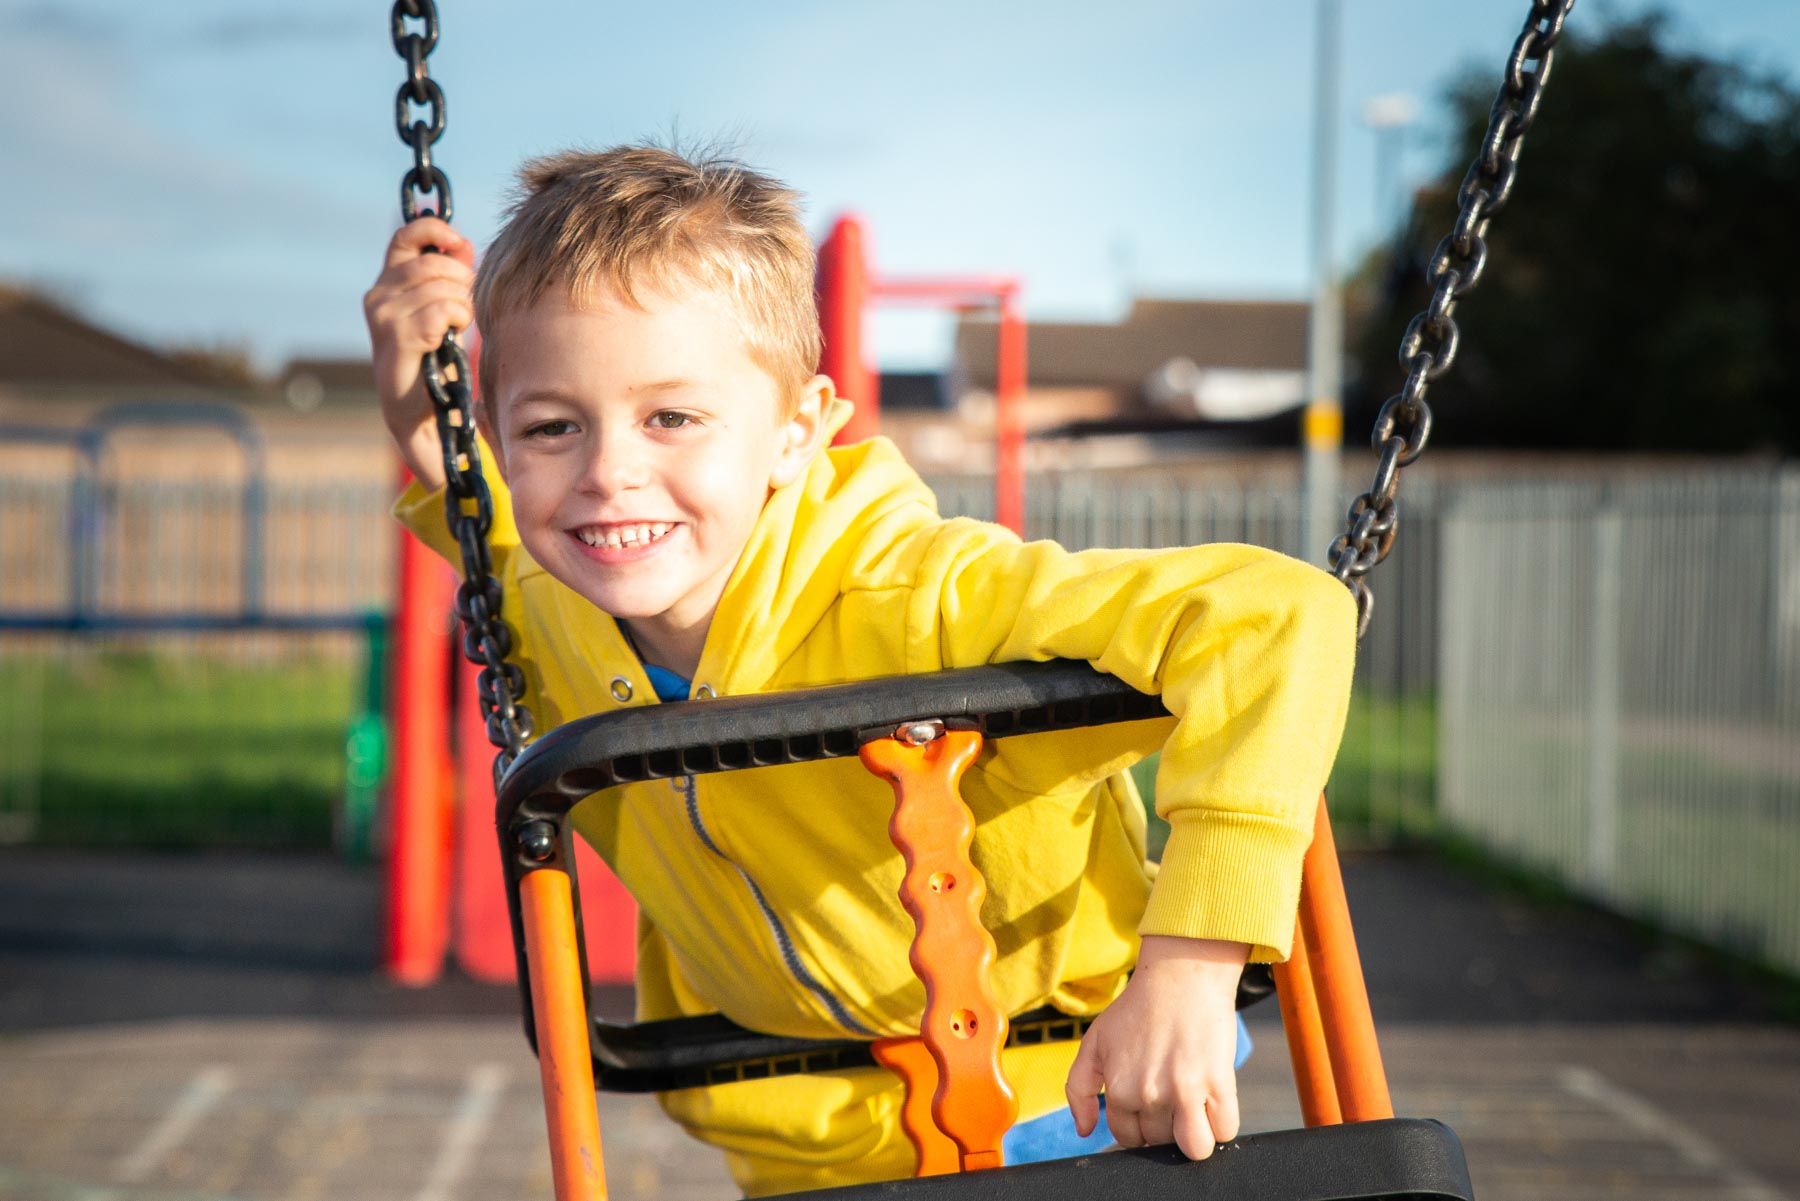 A handsome little boy with ADHD, Autism, Aspergers Syndrome plays happily on a swing in the summer sun